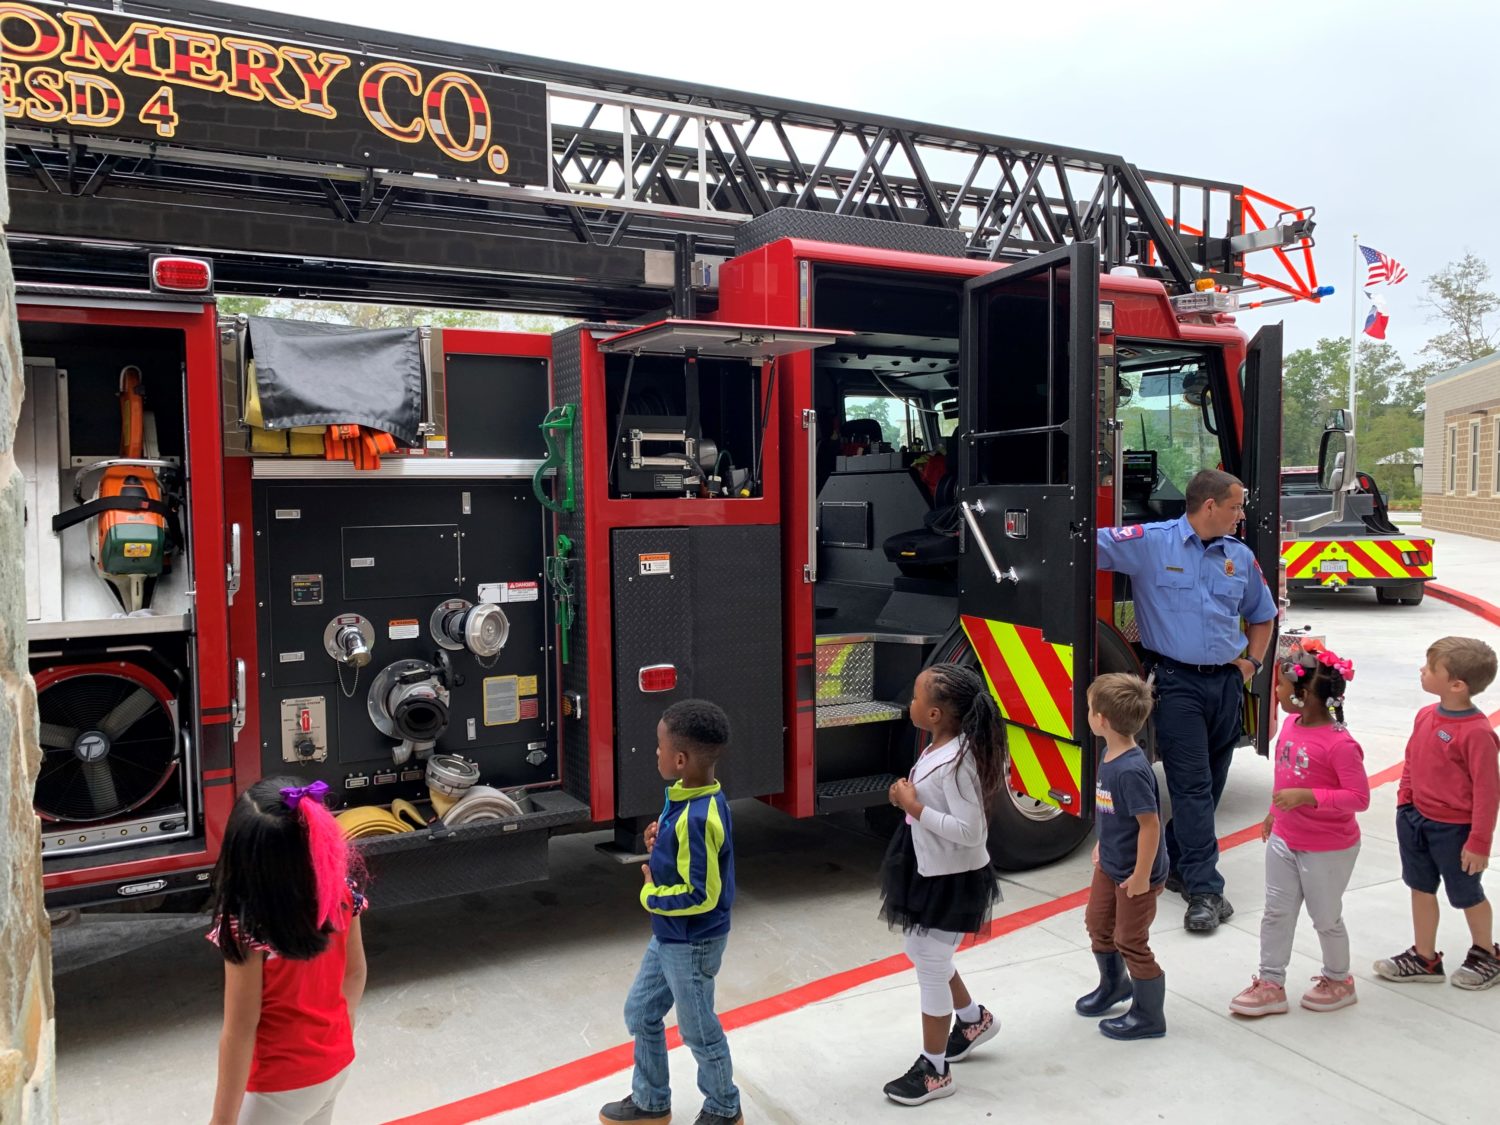 "students walk in front of a fire truck"